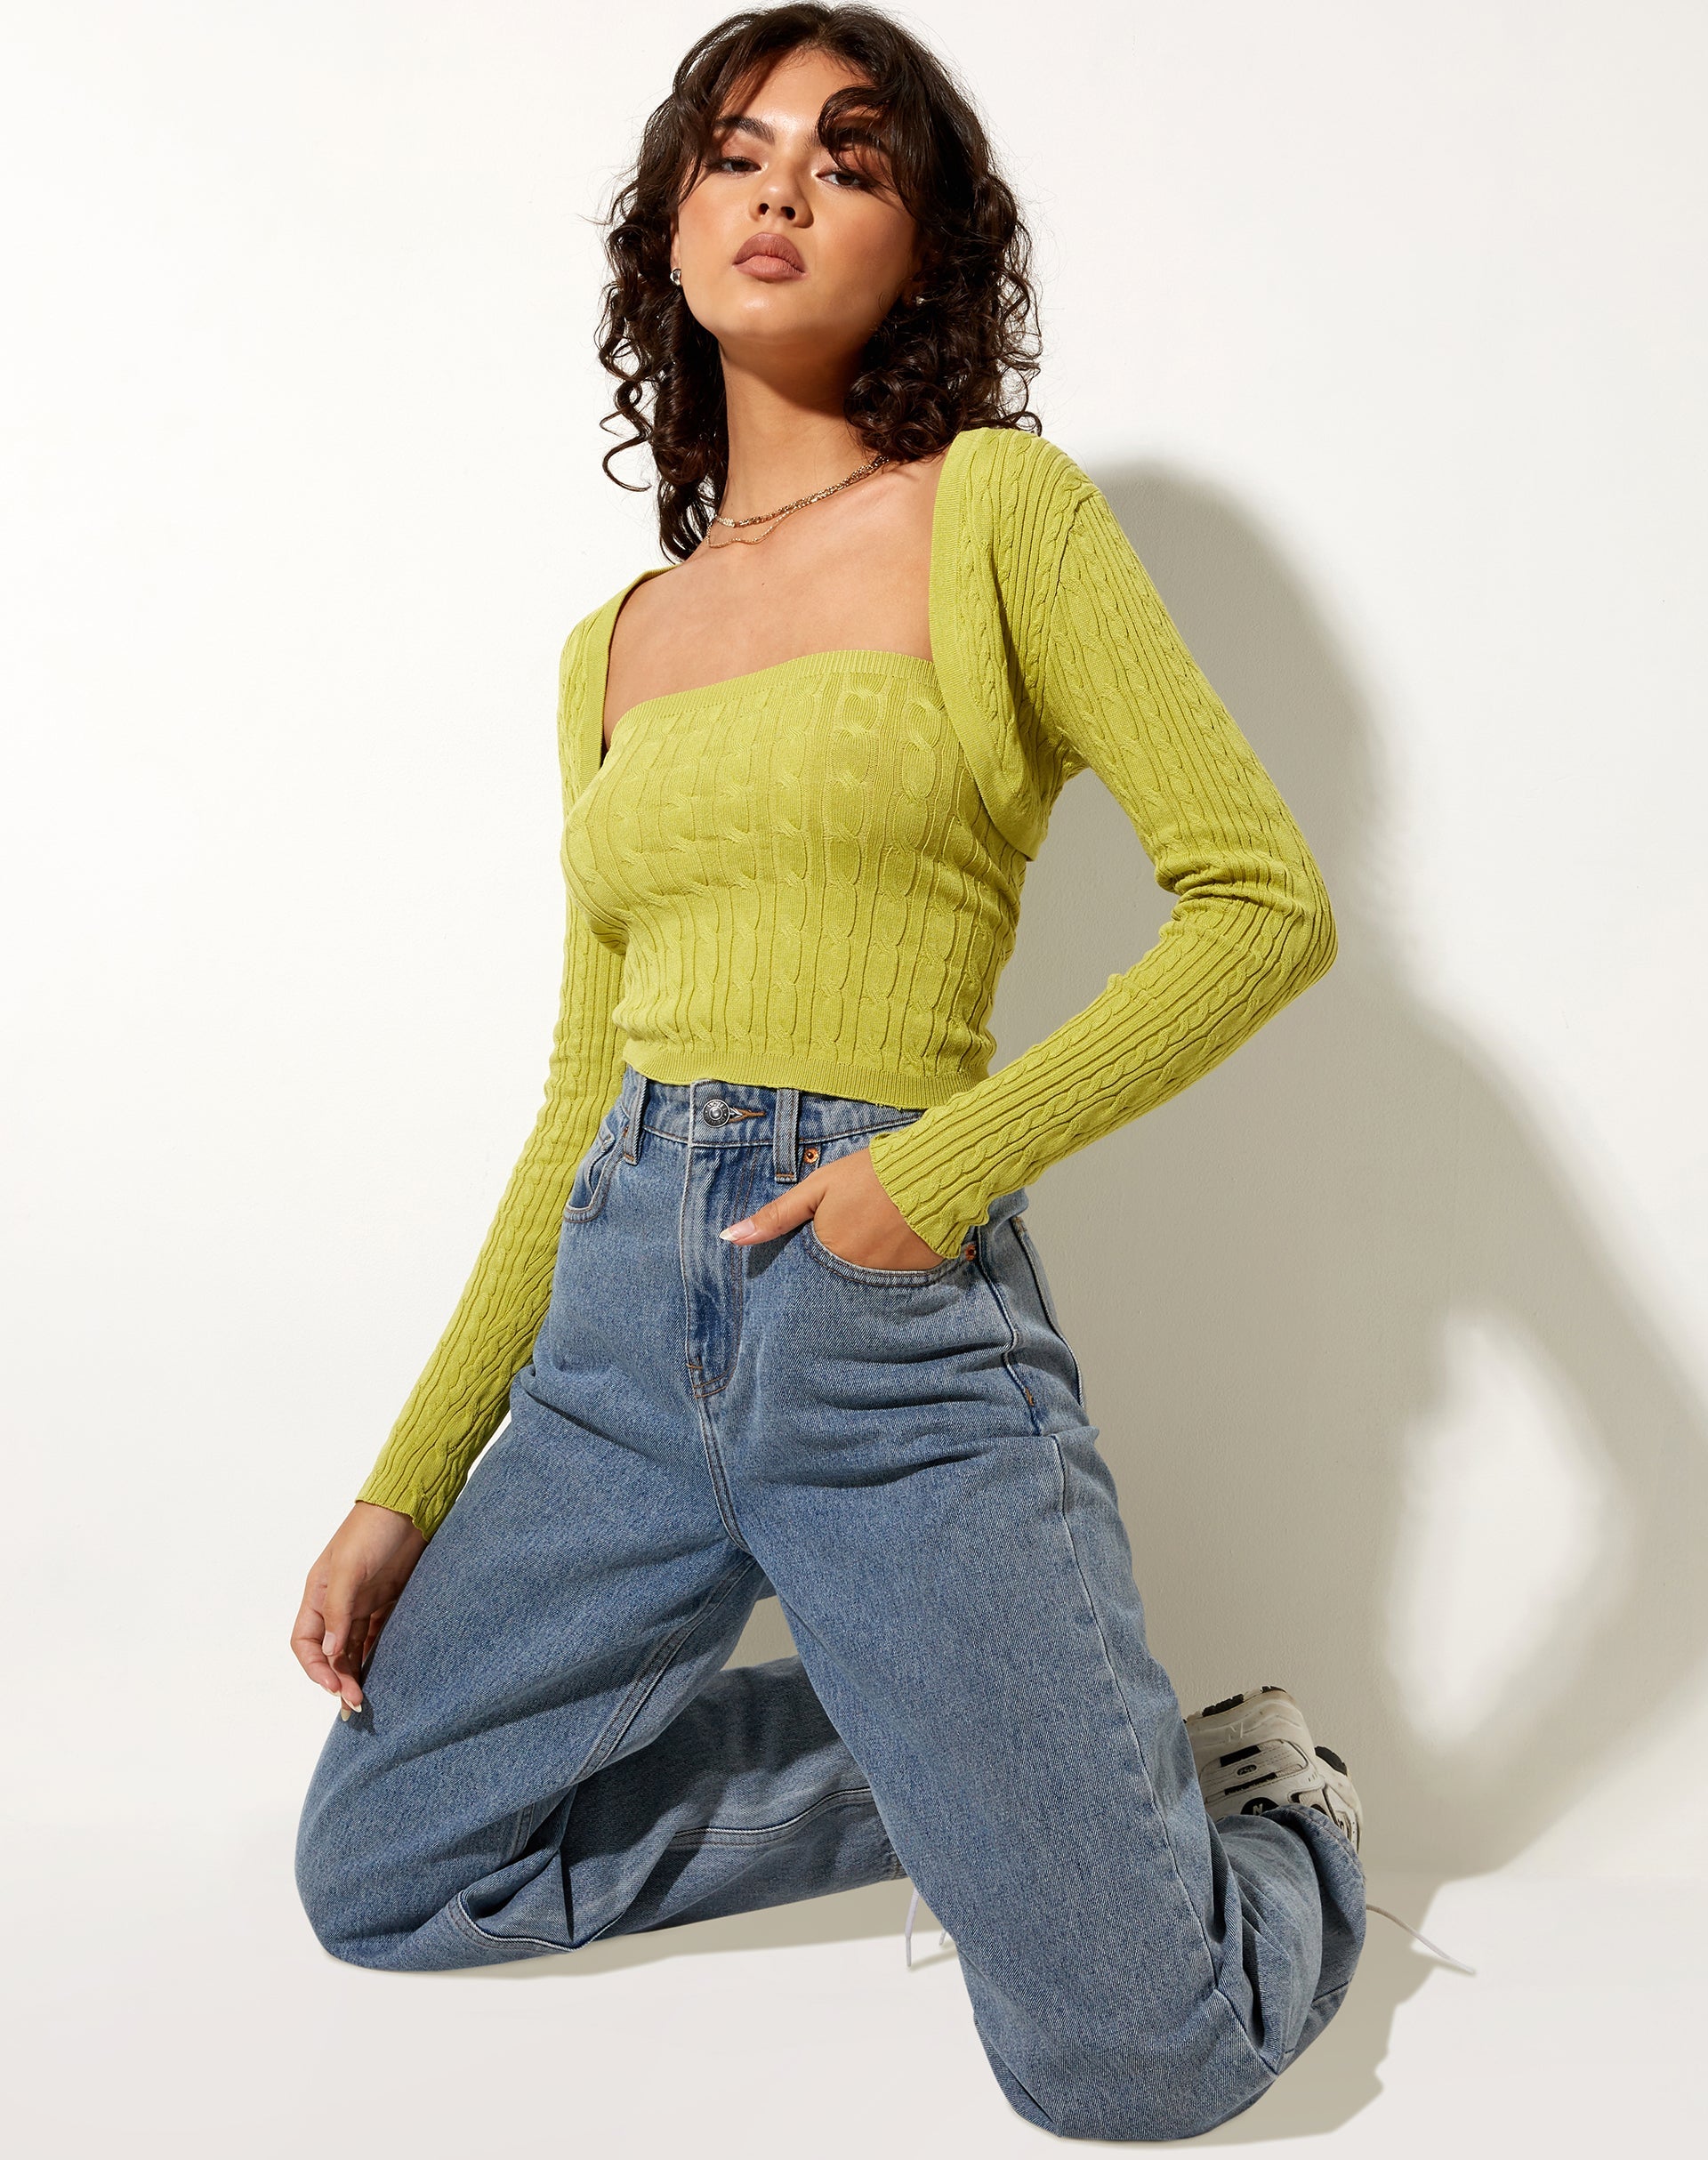 Image of Gya Long Sleeve Top in Knit Olive